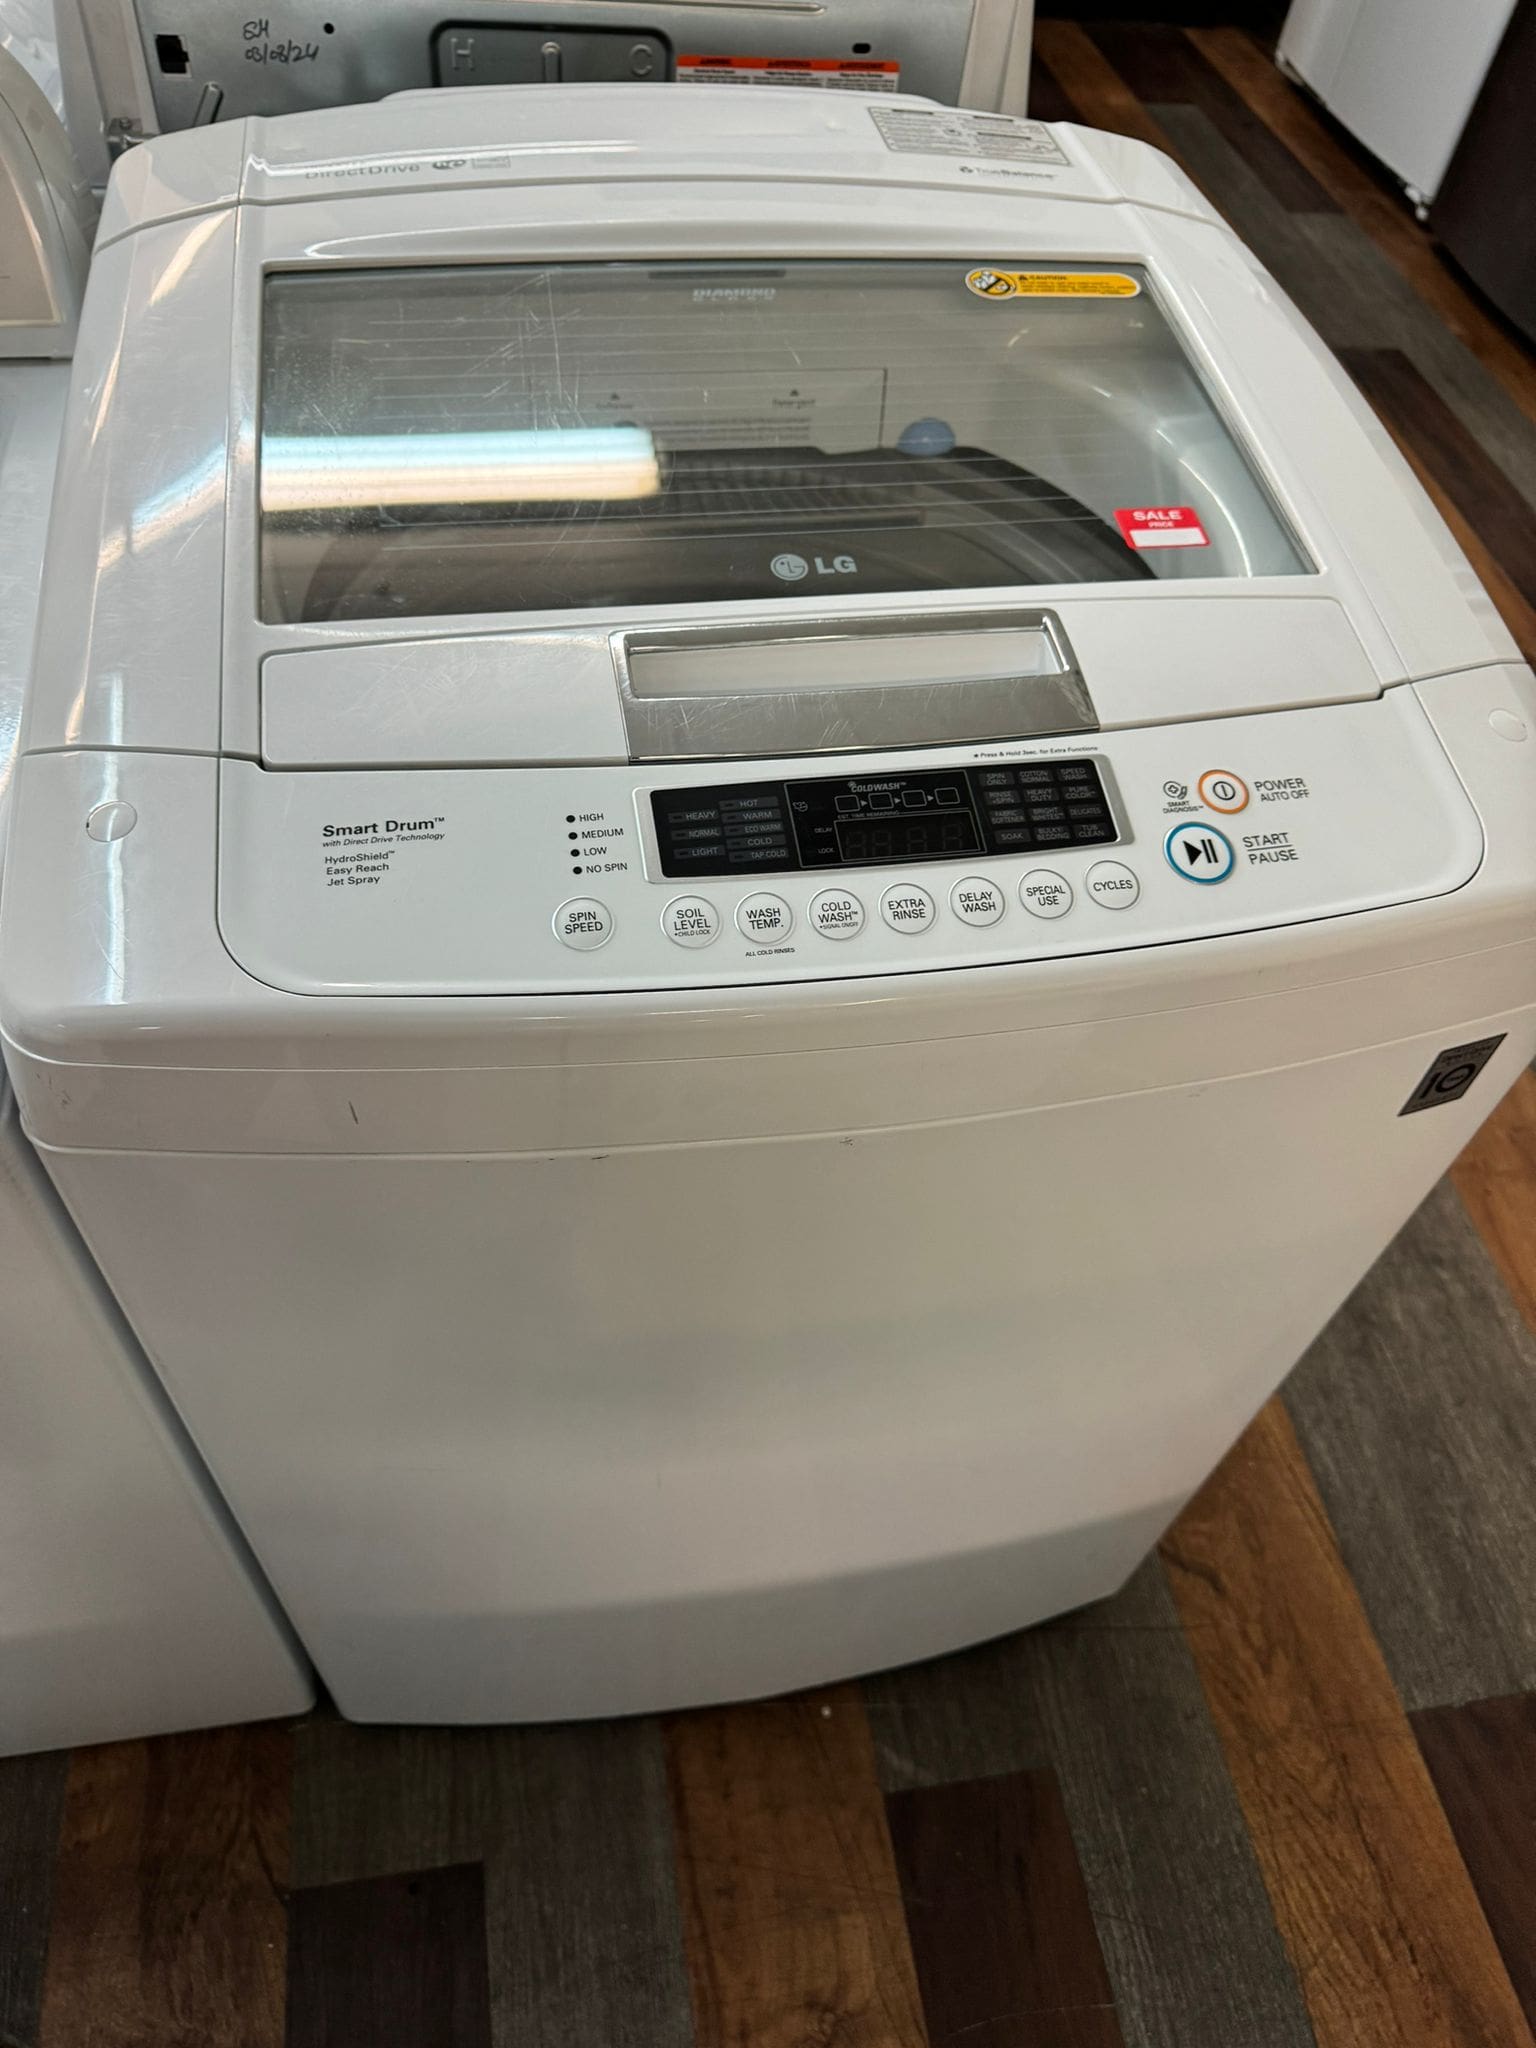 LG 27 Inch 4.1 cu. ft. Top Load Washer  – White – Like New